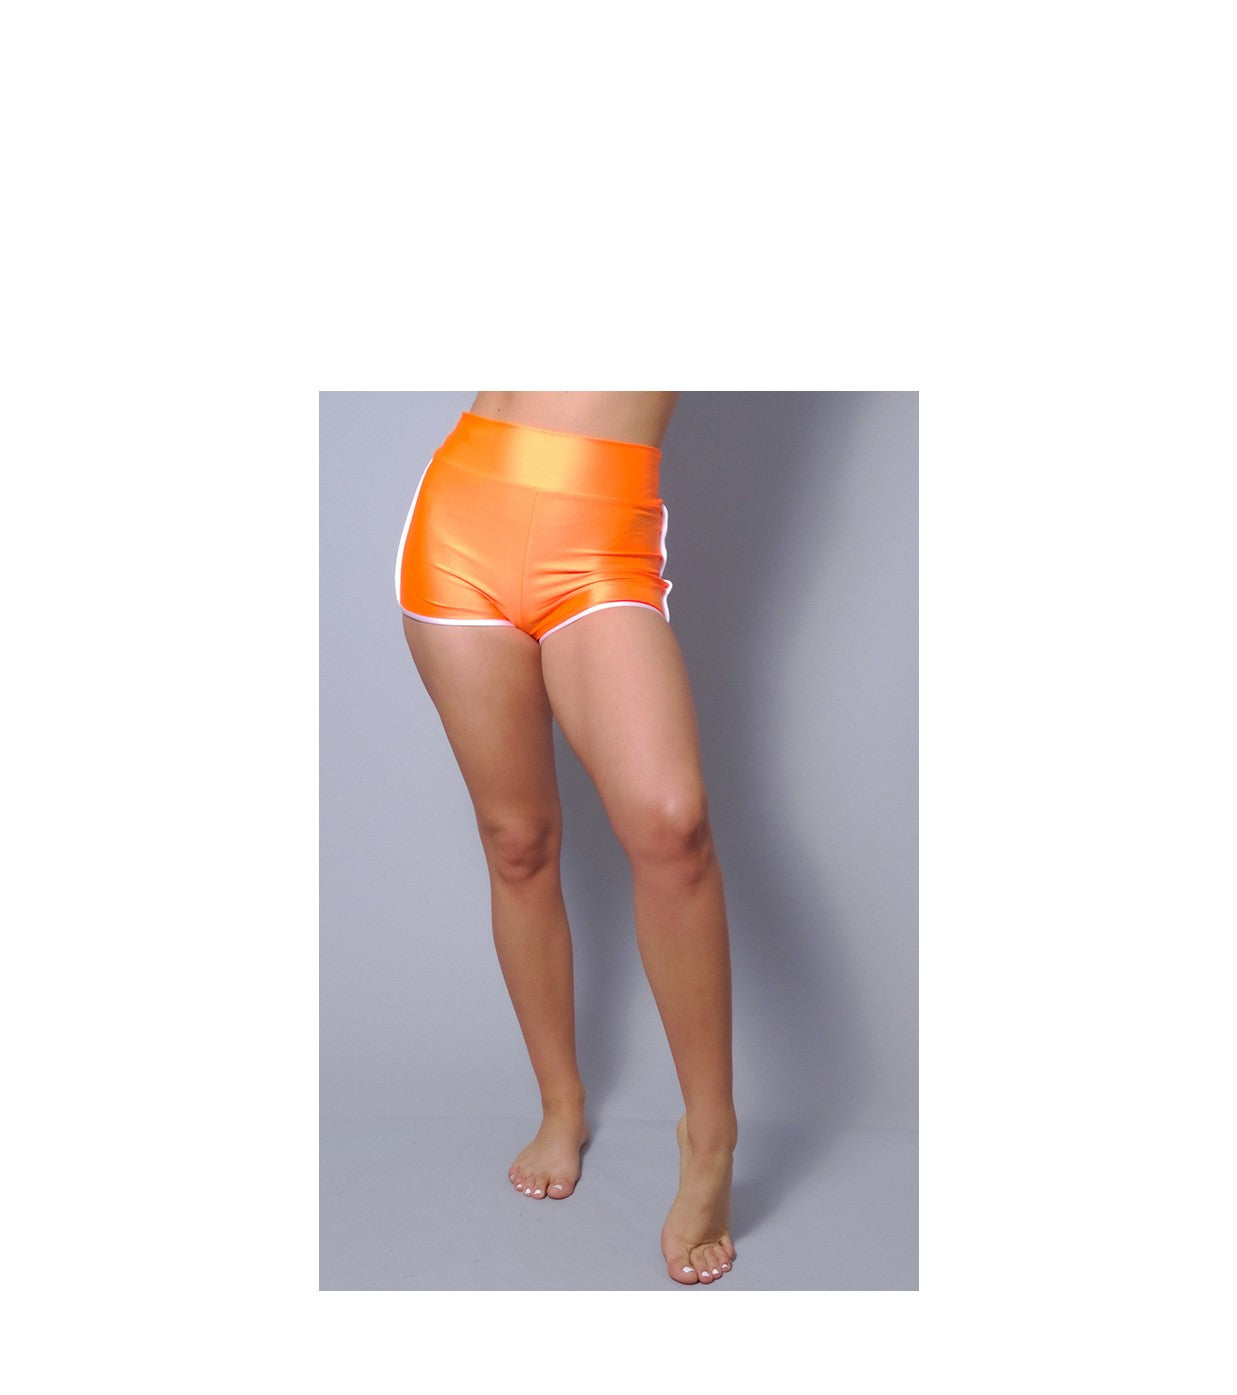 Cefian Sexy Fitness Shorts in 4 Hot Color Choices in Size S, M, or L